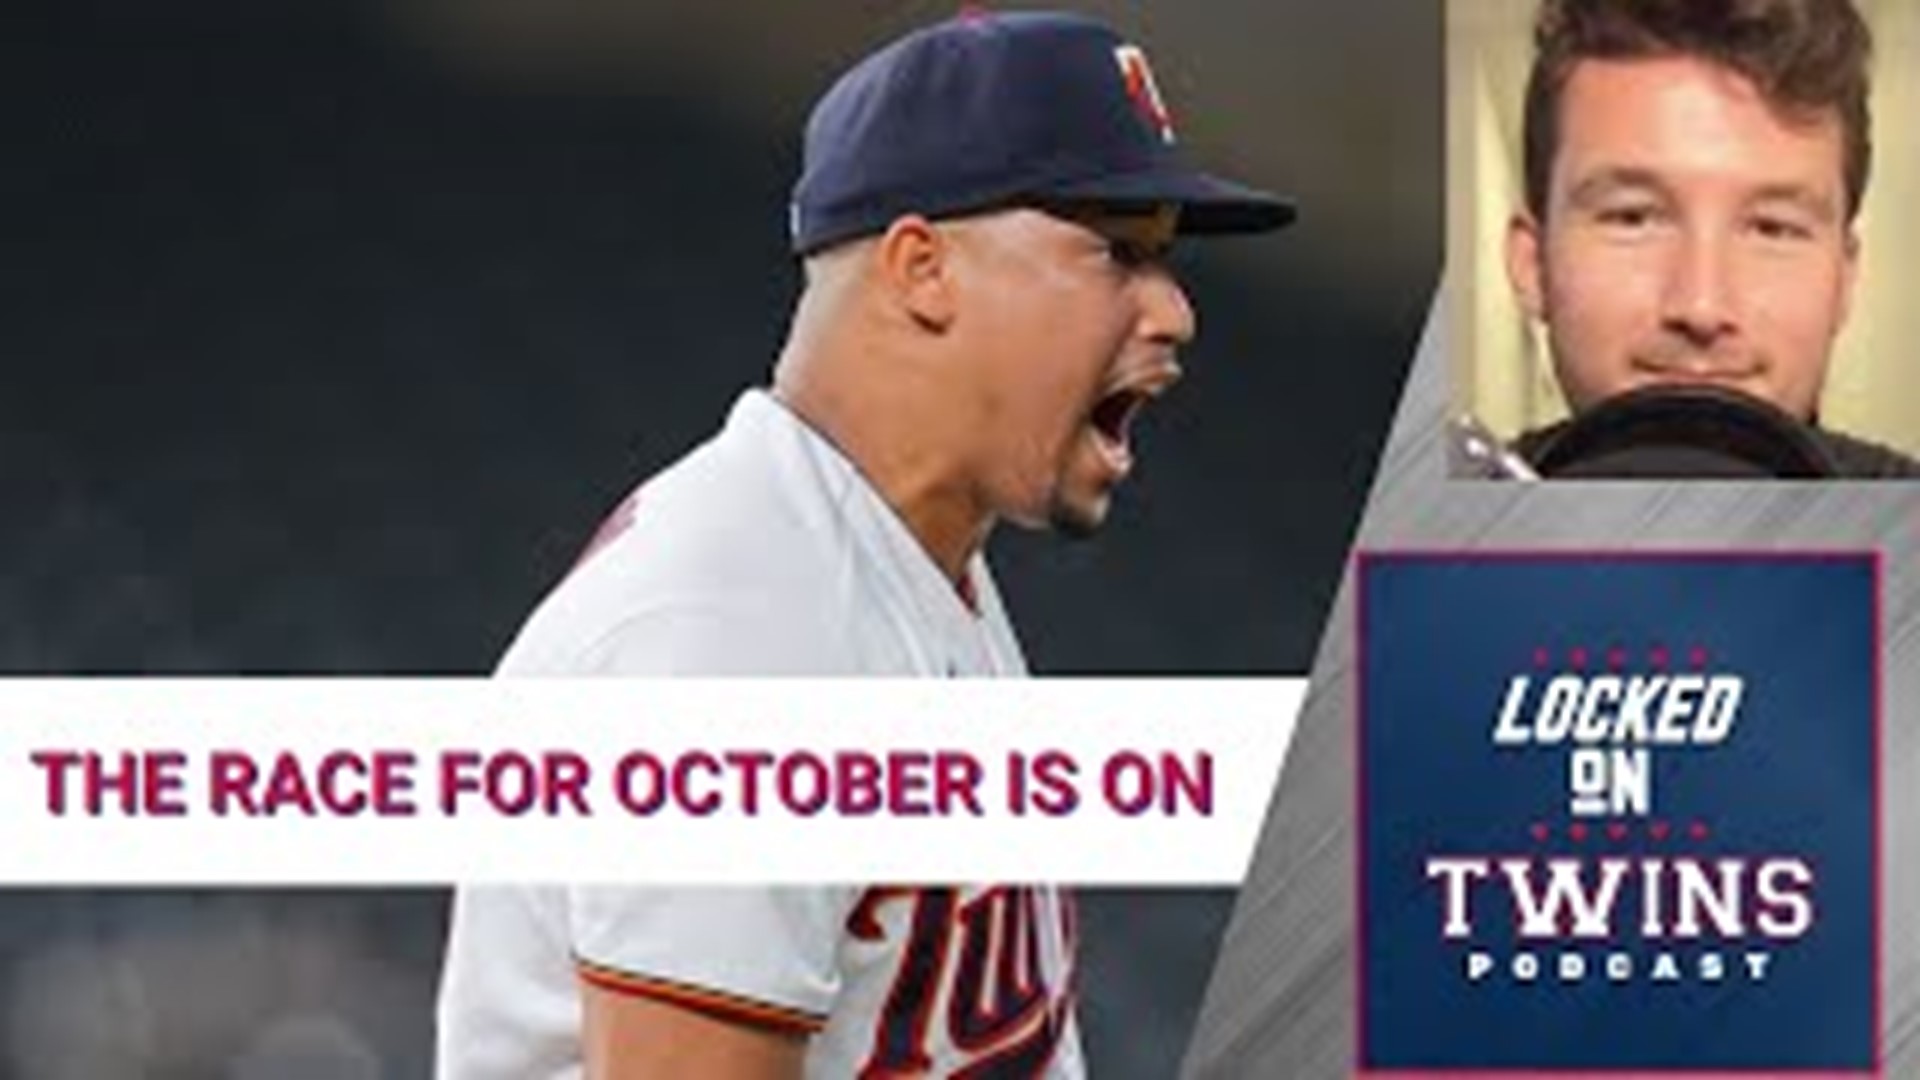 The Minnesota Twins swept the San Francisco Giants at Target Field, keeping their hopes alive as they fight for their third division title in four seasons.